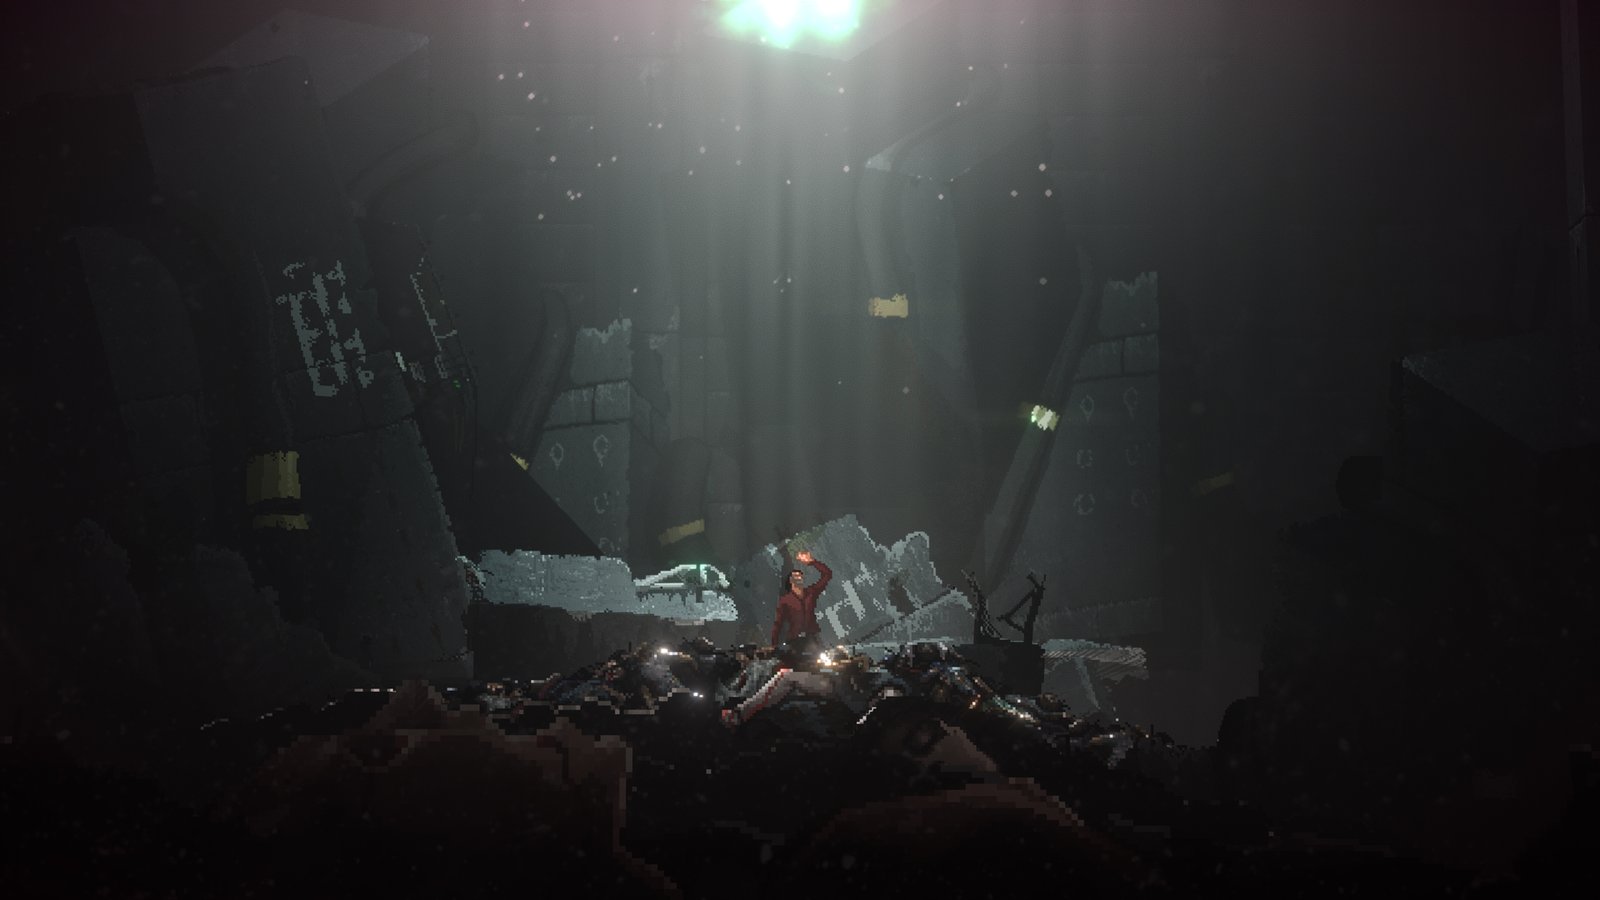 2.5d artwork showing a character standing in a shard of light on top of a pile of rubble